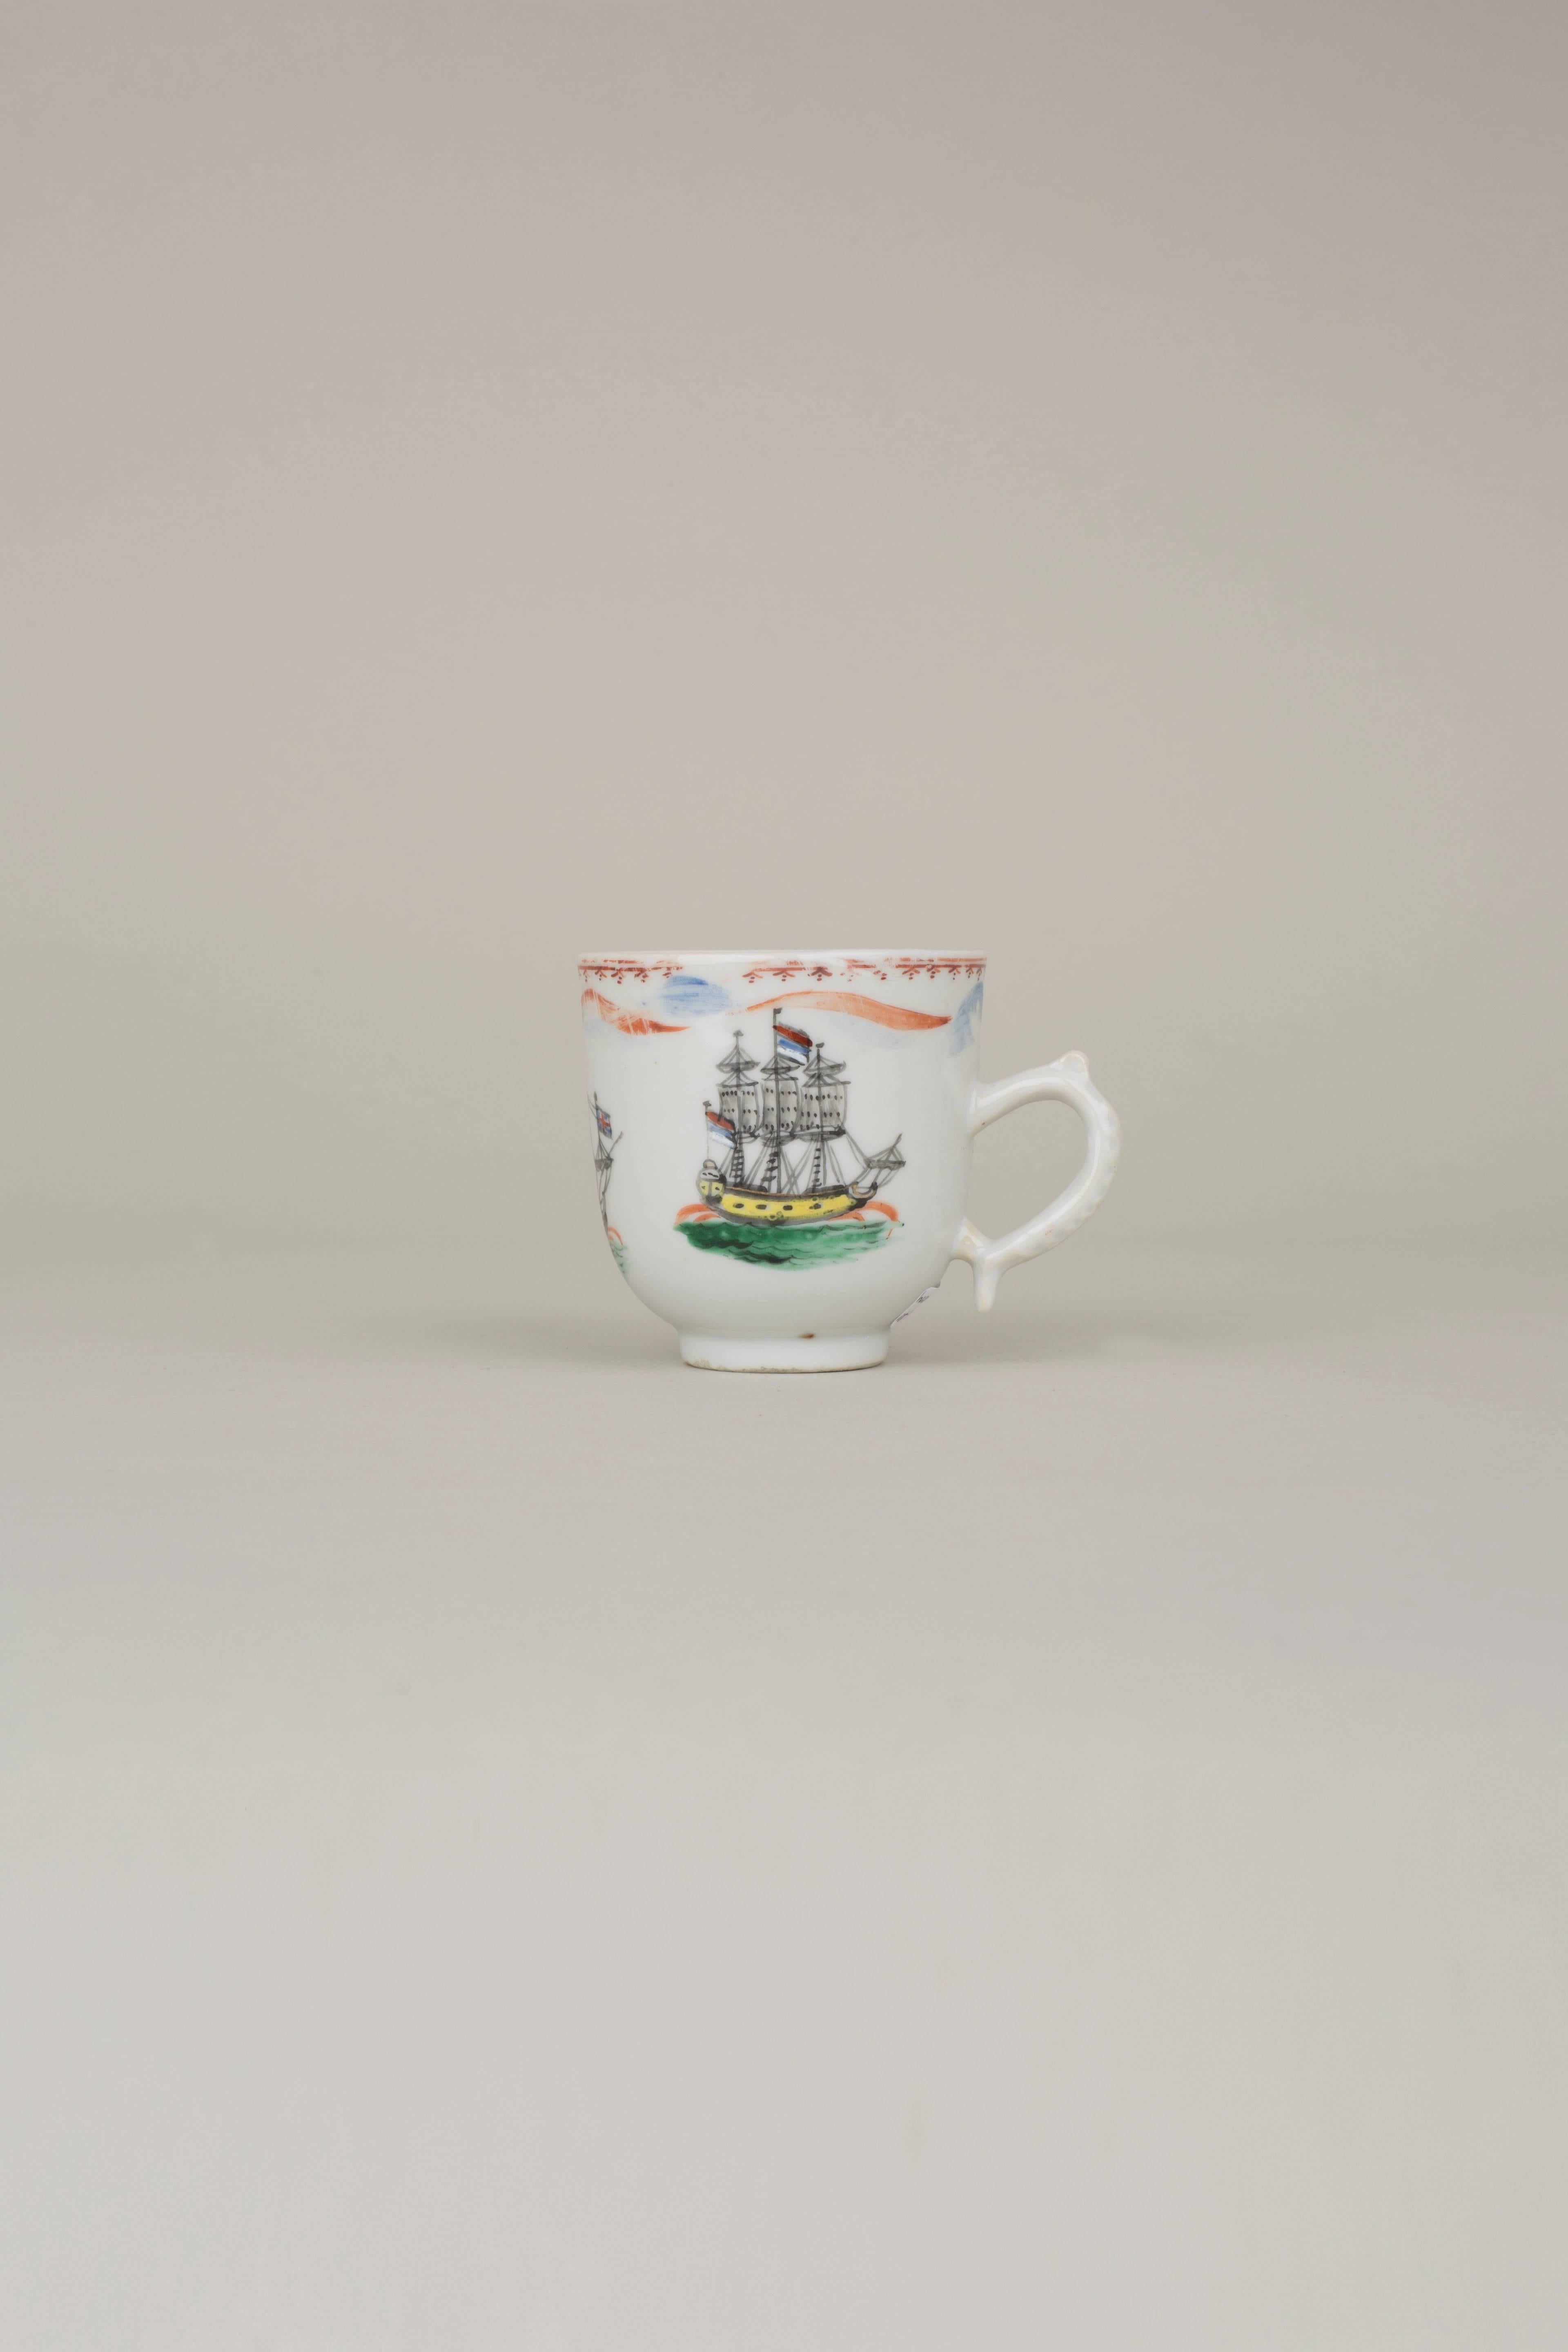 A Chinese export porcelain coffee cup painted on the exterior with three ships, one flying British flags, one with white flags and the other with Dutch flags, the interior plain.

Measures: 6.4cm high.

Qianlong, 1736-1795.

Condition: